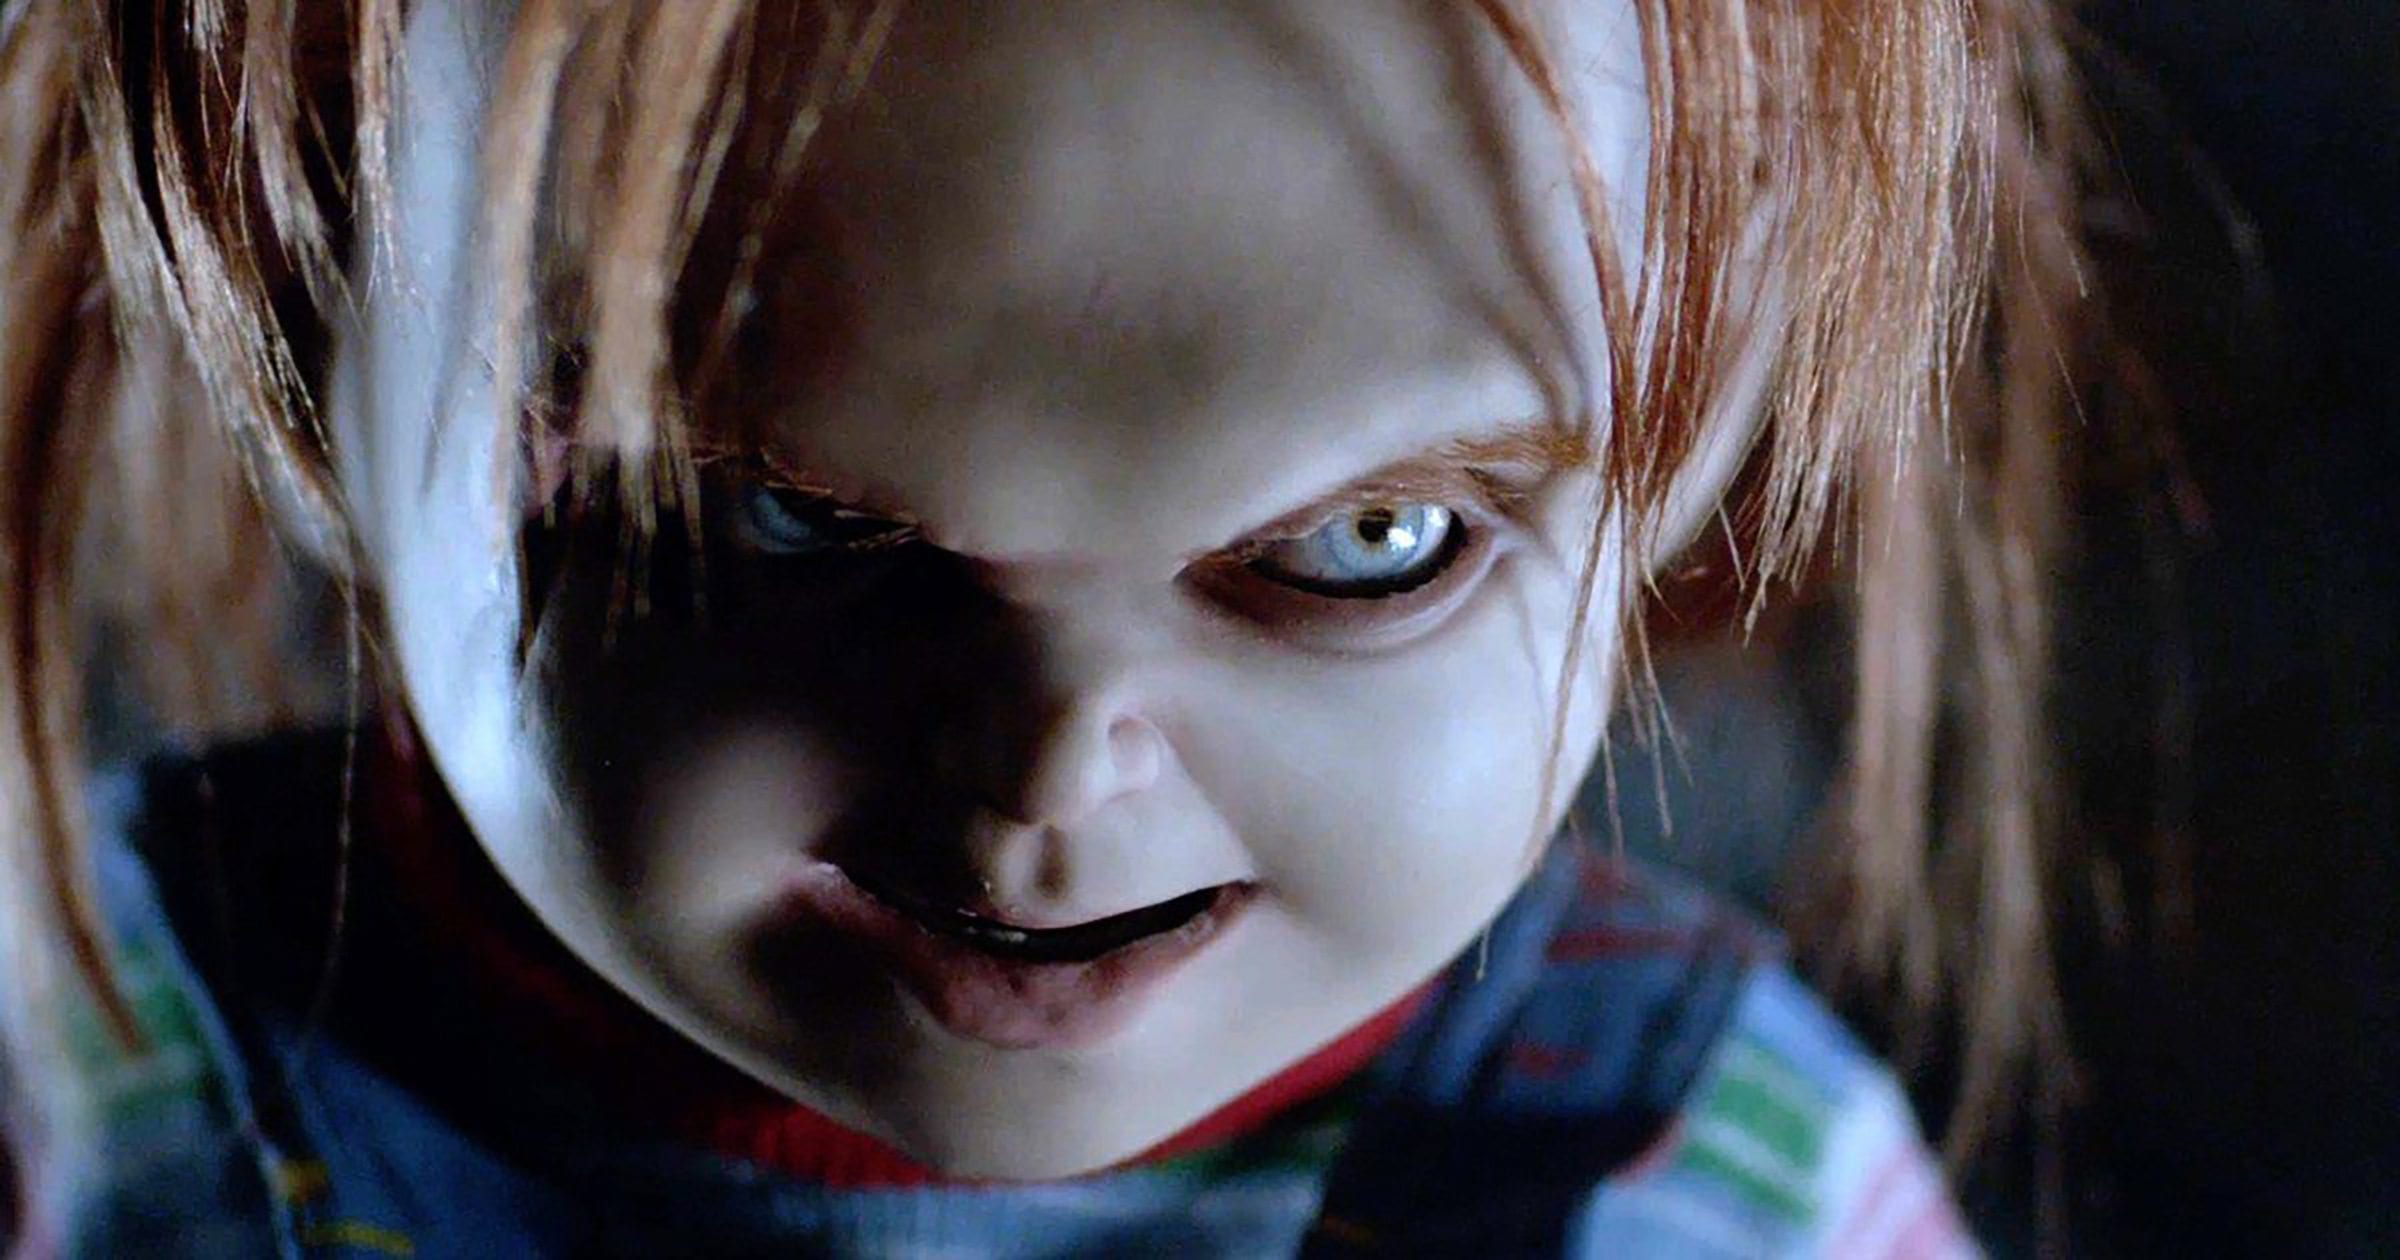 A new trailer for the seventh installment of Don Mancini's 'Child’s Play' franchise, aptly named 'Cult of Chucky', has been born.